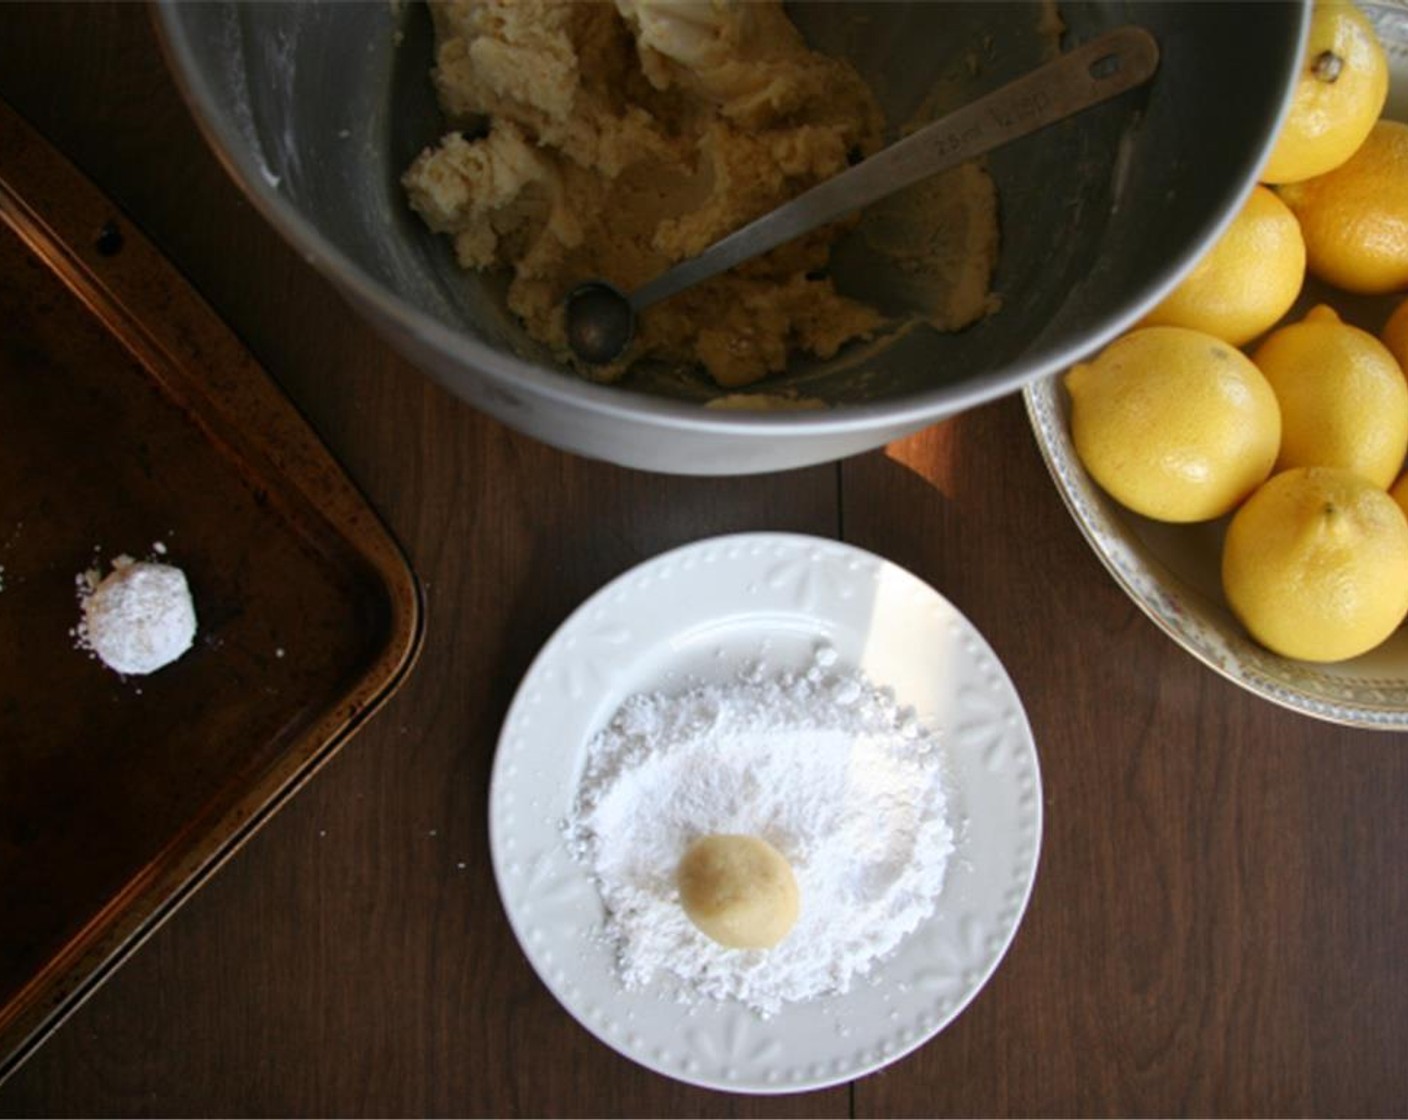 step 5 Coat the balls in the confectioners’ sugar and place onto cookie sheets. Bake for 10-11 minutes.